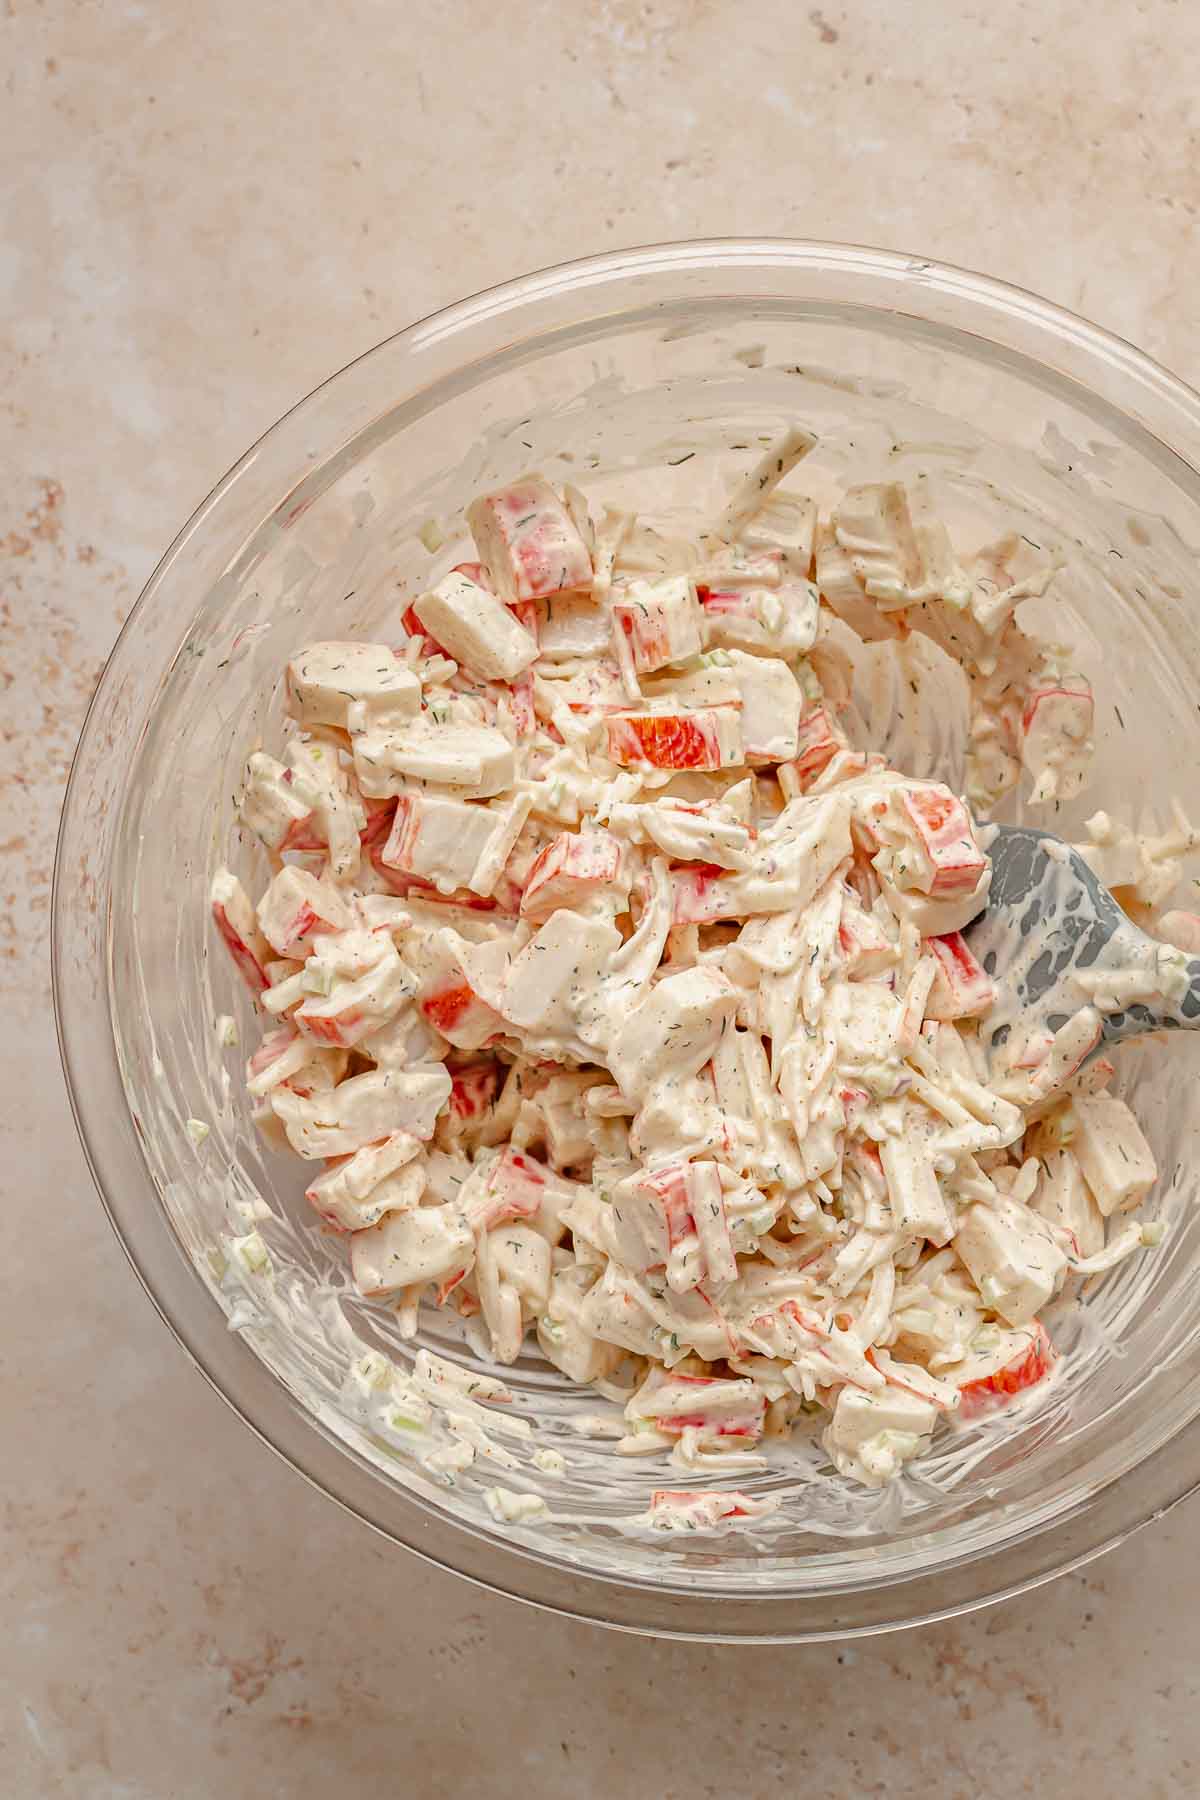 Imitation crab and dressing mixed in a bowl.